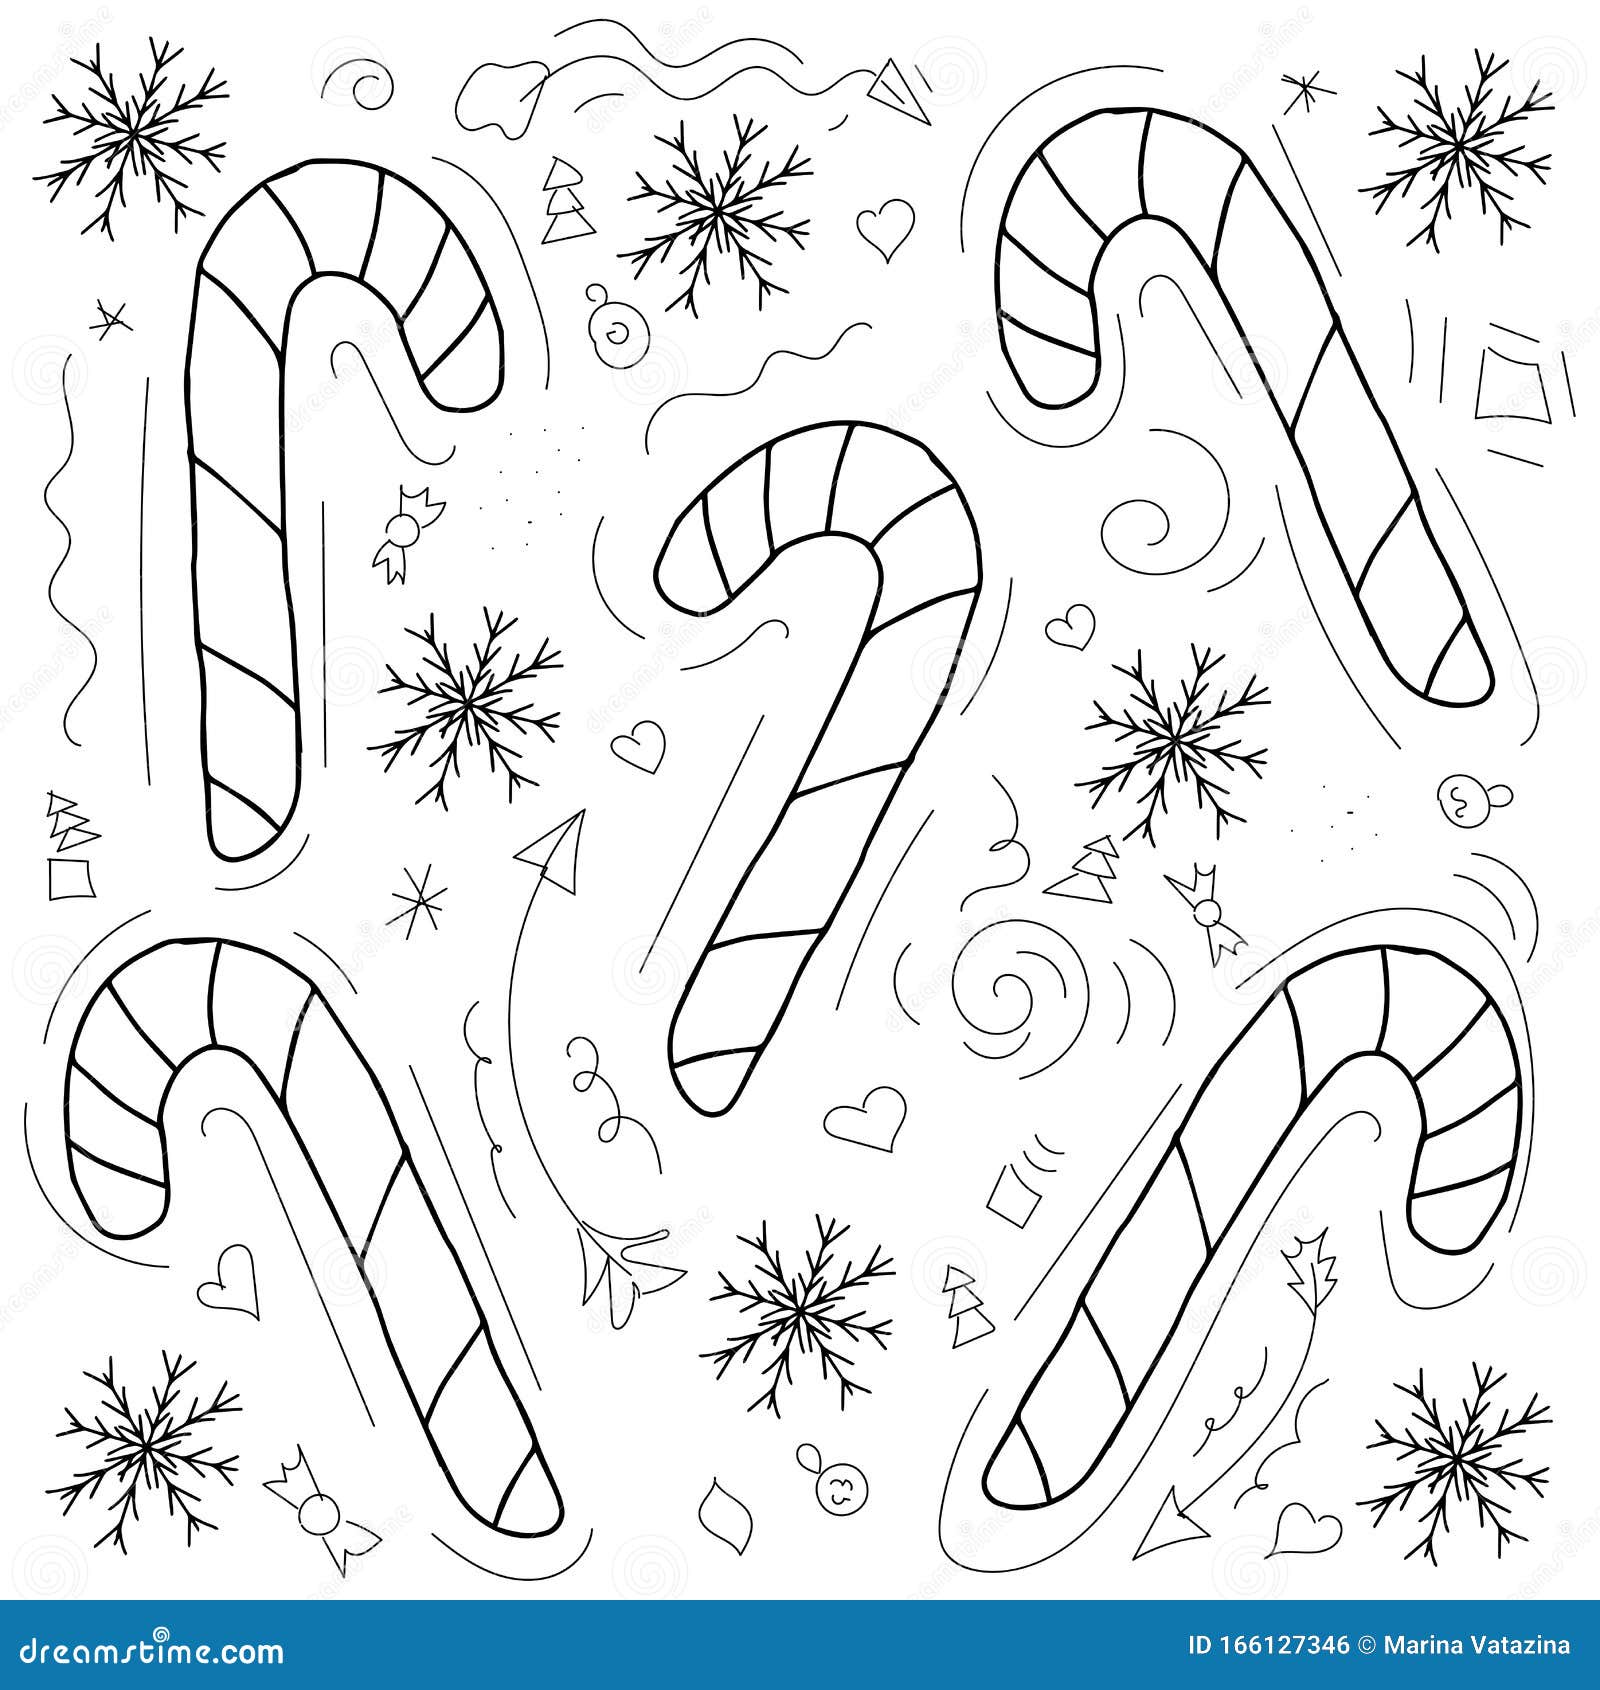 Vector Pattern With Hand Drawn Christmas Candies On White Background With Black Line 新年和圣诞节背景 甜蜜库存例证 插画包括有背包 抽象